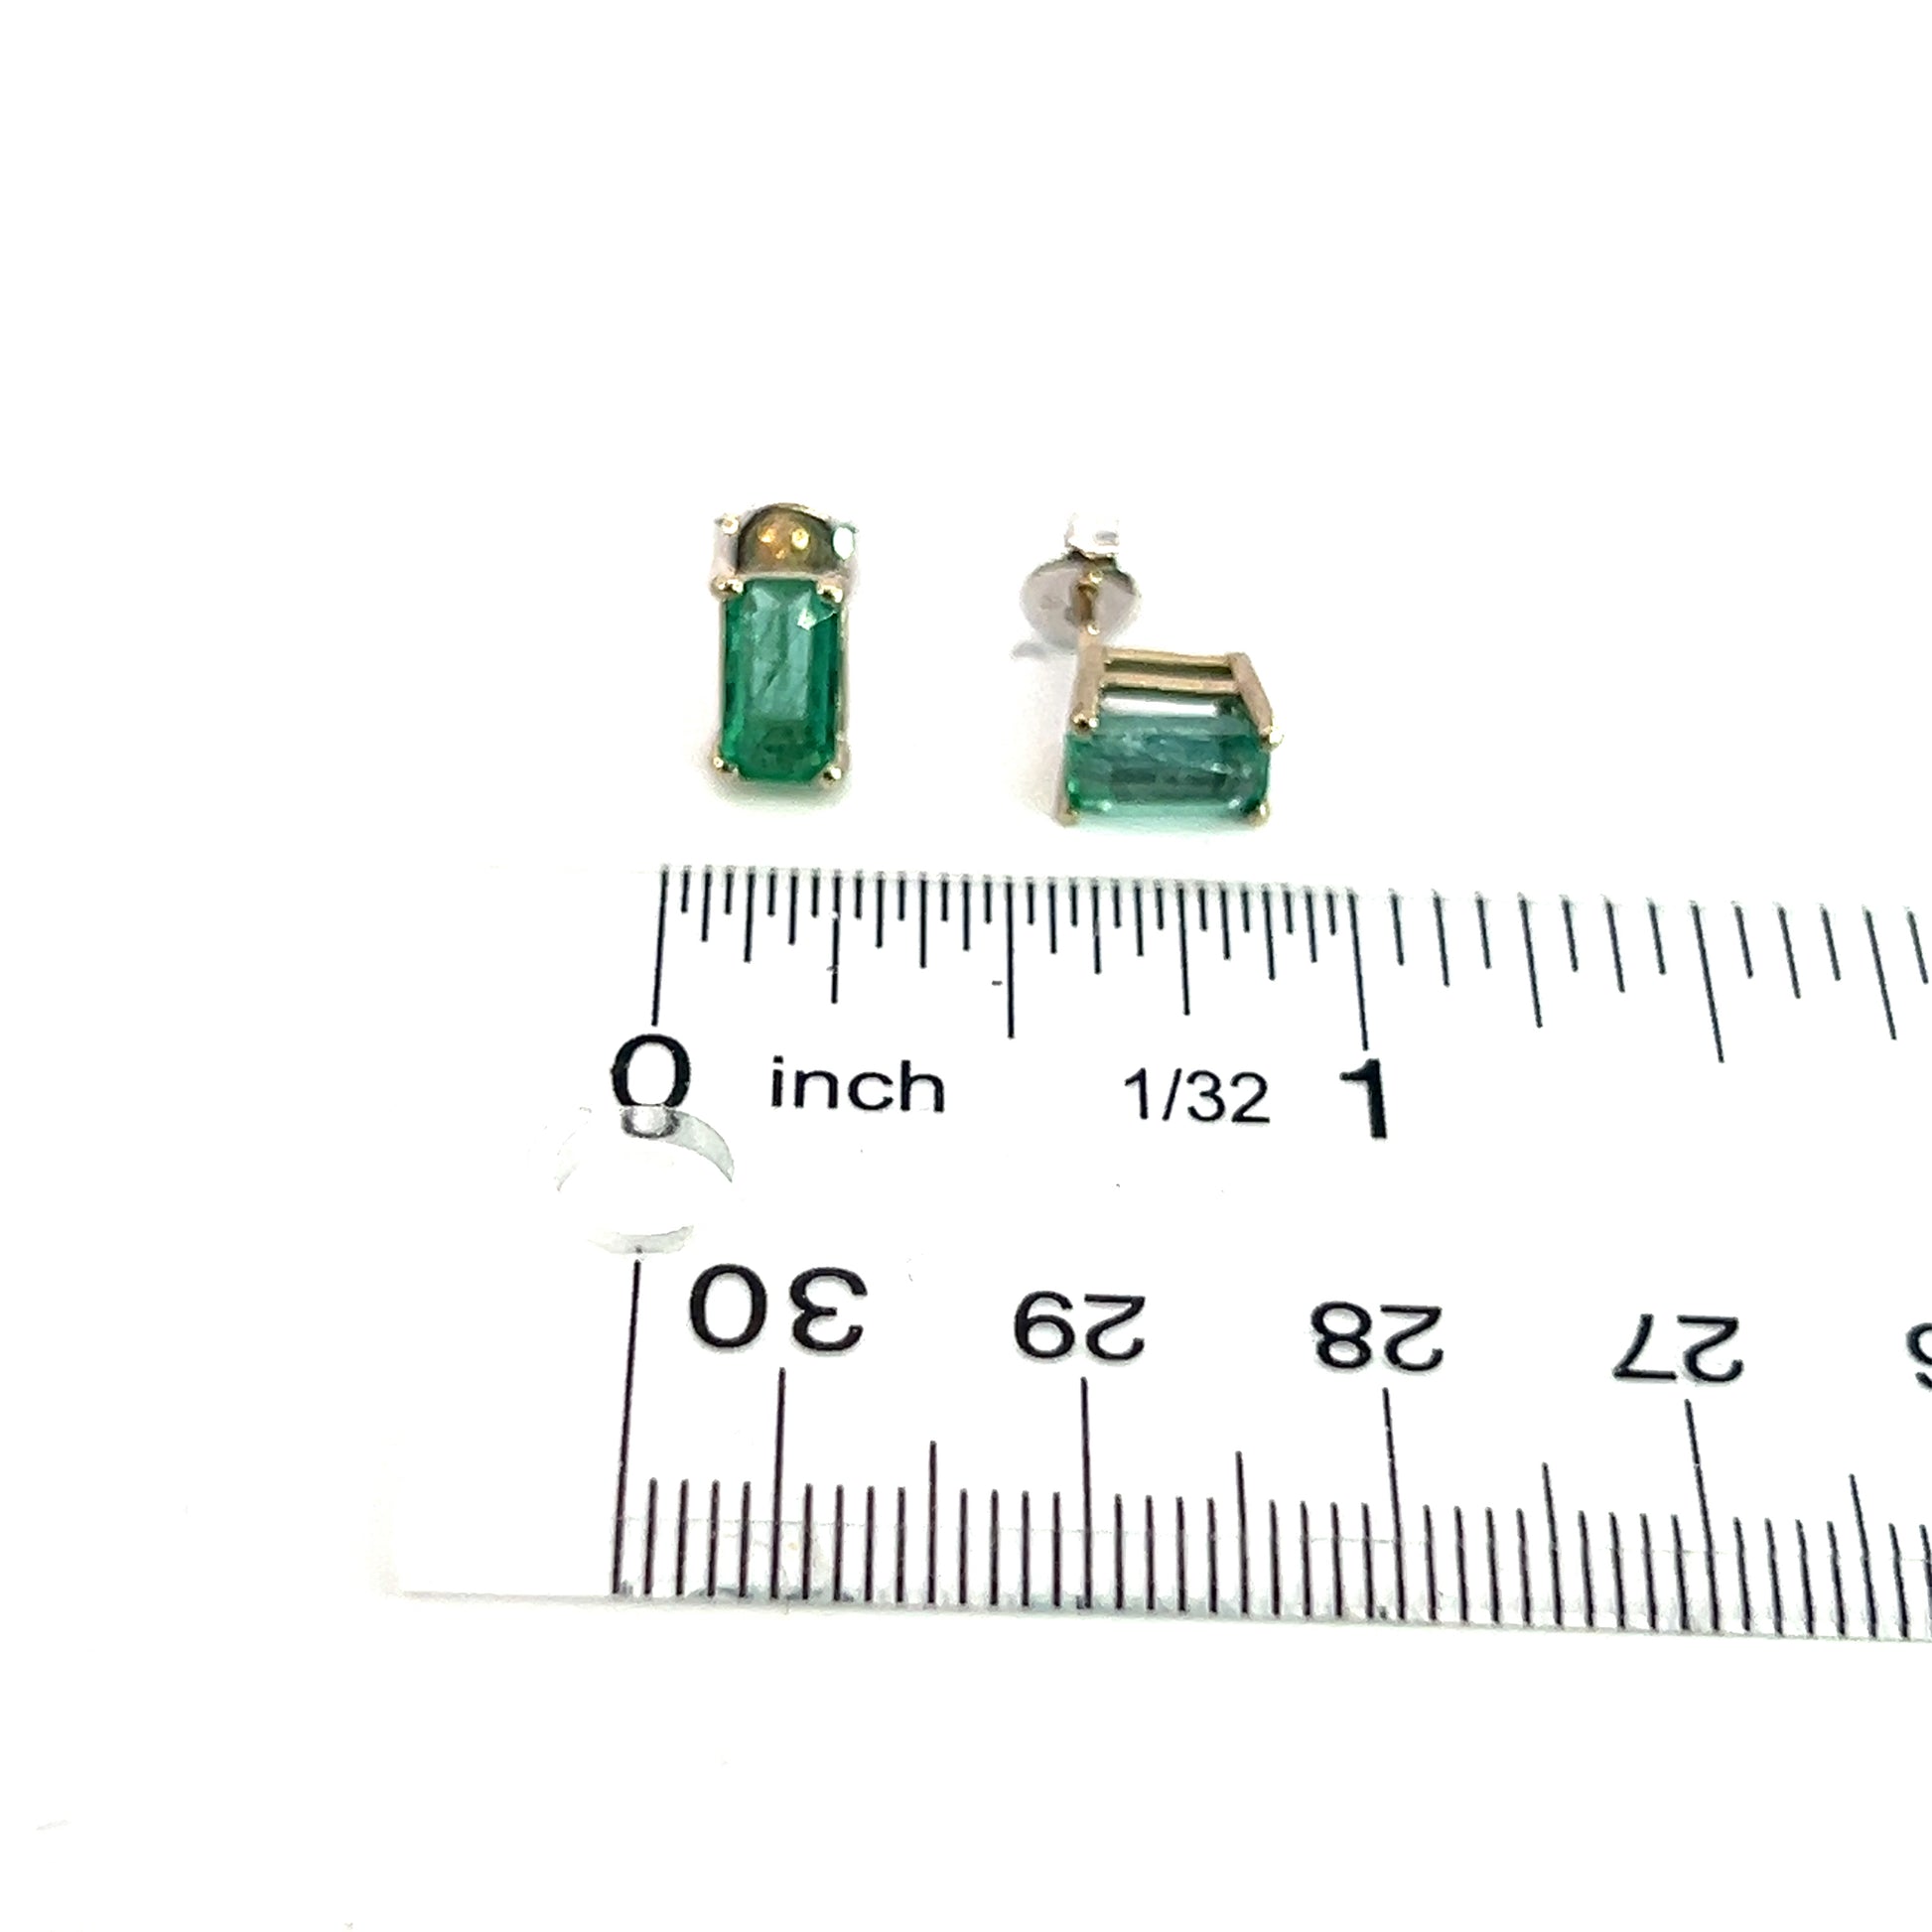 Natural Emerald Stud Earrings 14k White Gold 1.25 Cts Certified $3,490 215625 - Certified Fine Jewelry